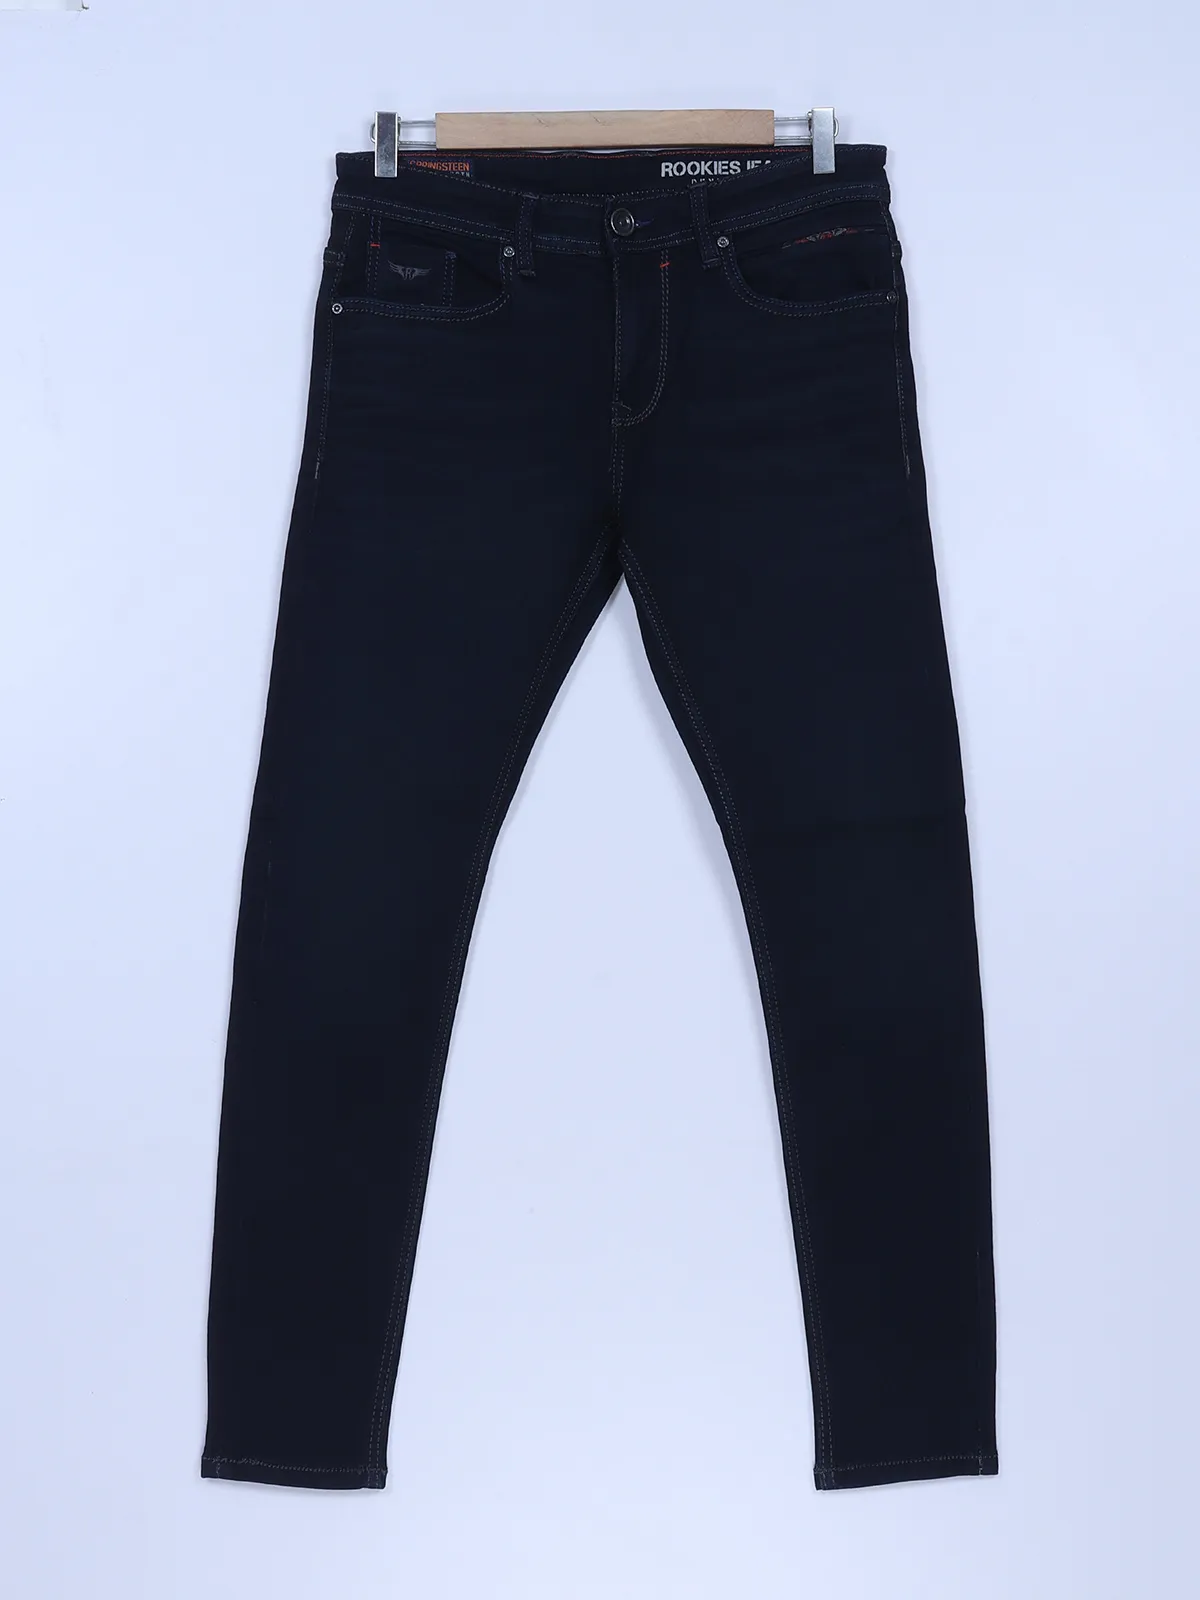 Rookies solid jeans in navy